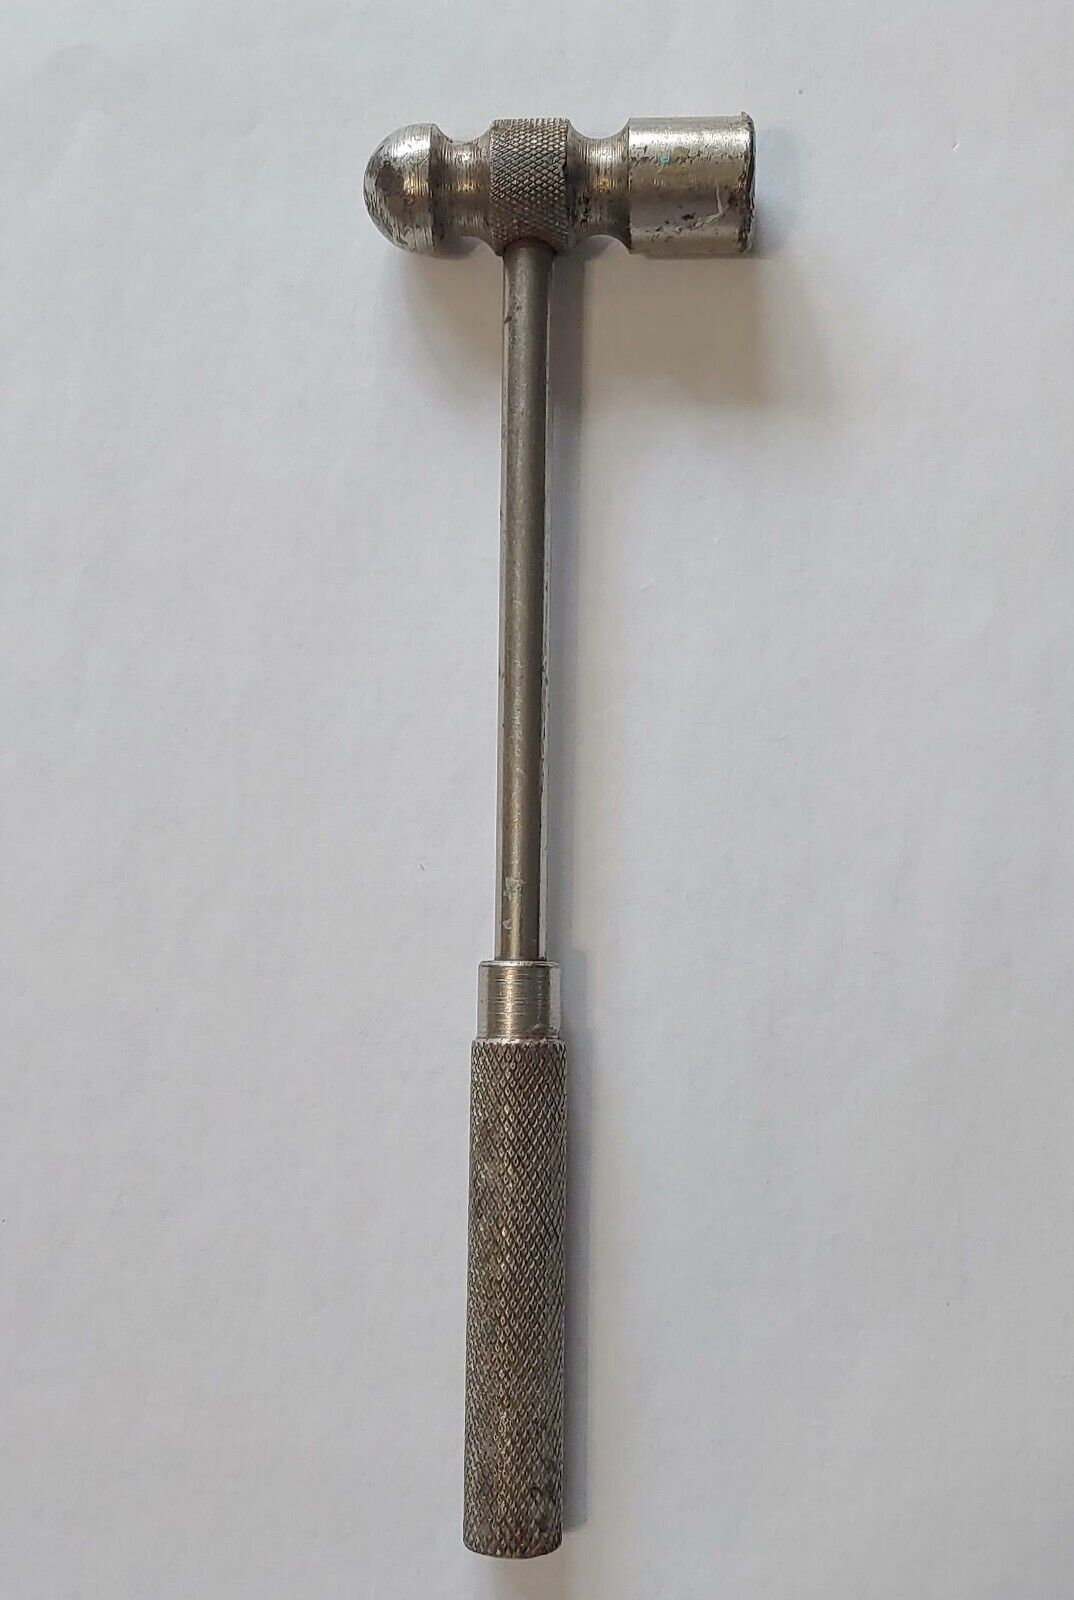 Small Vintage All Metal Ball Peen Hammer - Machinist/Jeweler - Unbranded